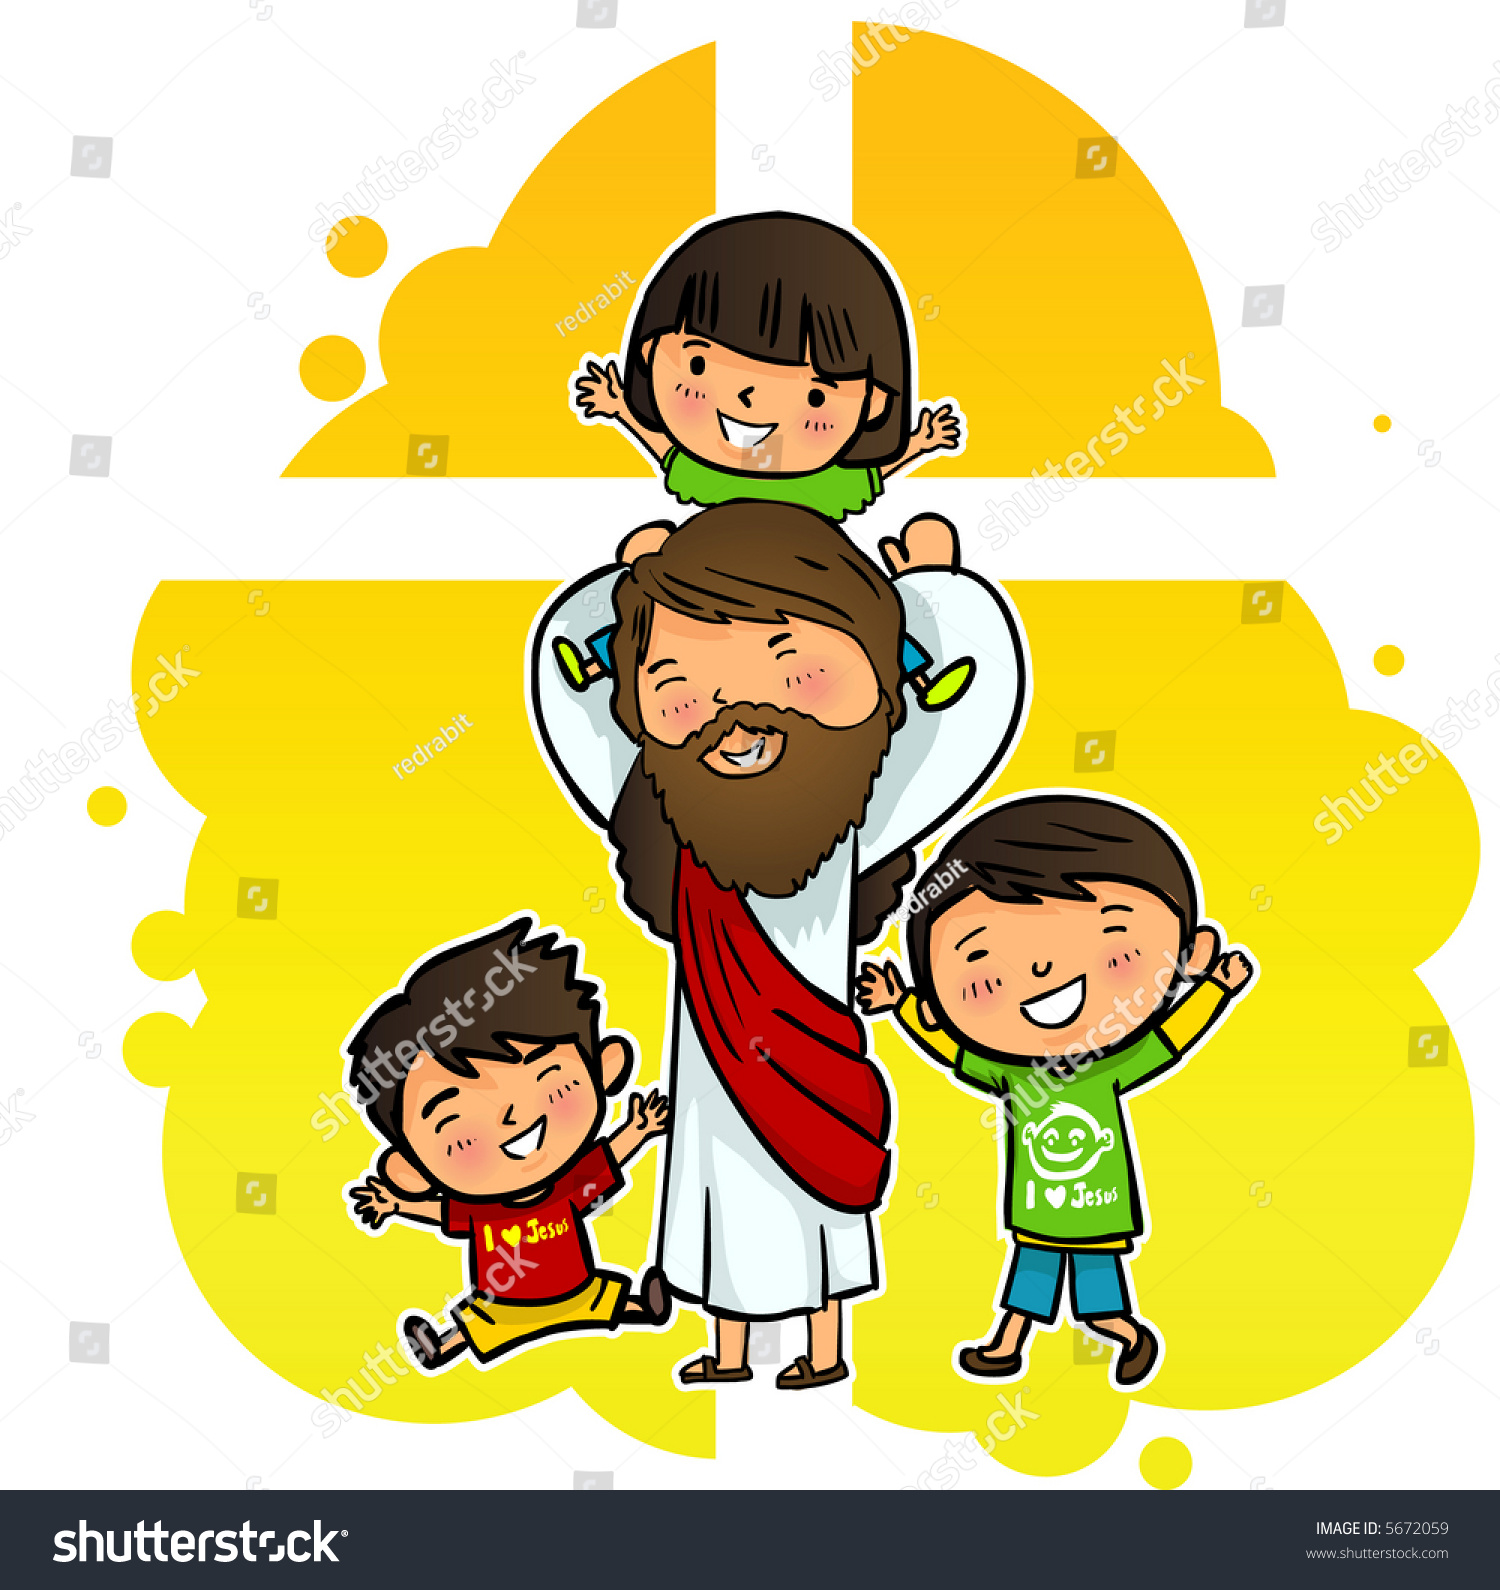 clipart jesus and child - photo #46